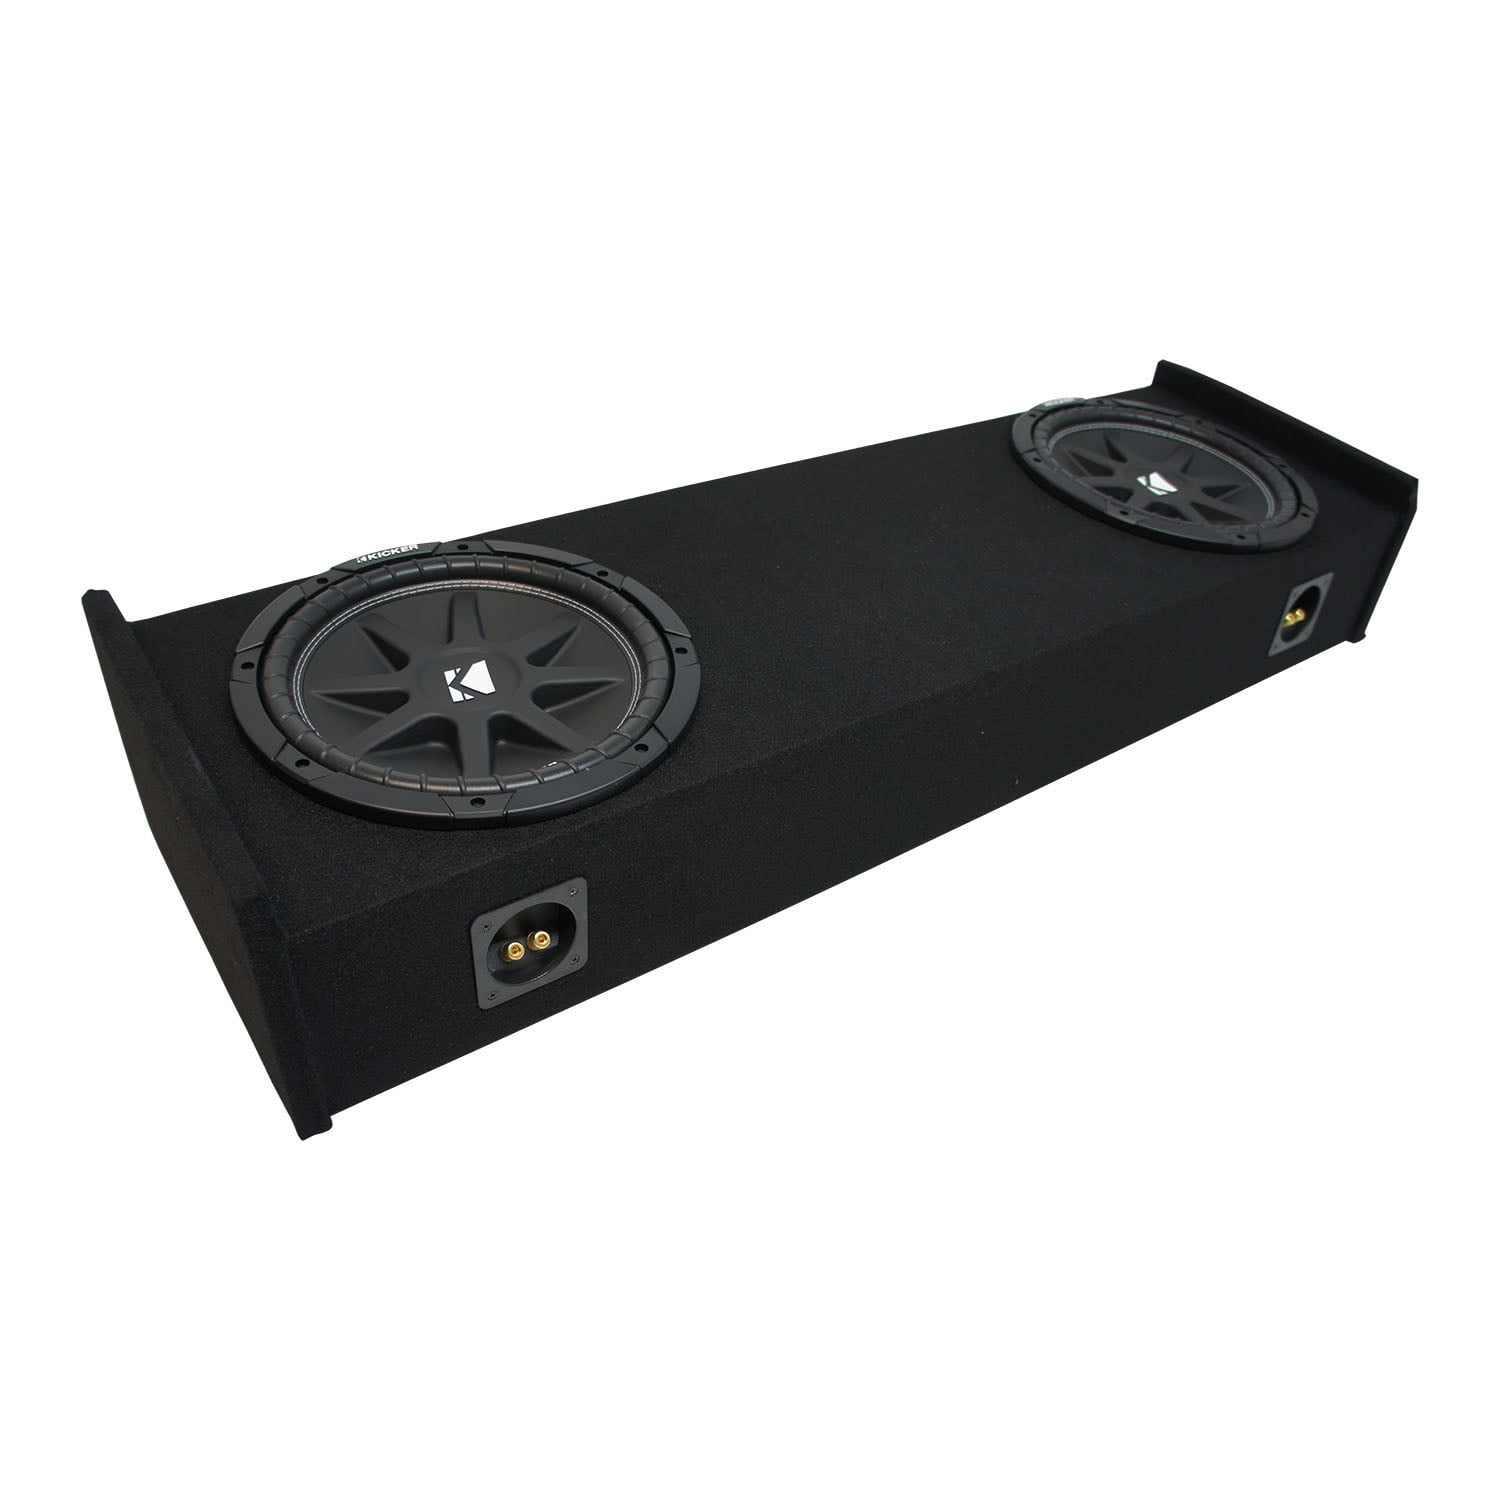 Ford F150 Downfiring Under Seat Single 12" Subwoofer Enclosure Sub Box 1997-Up 